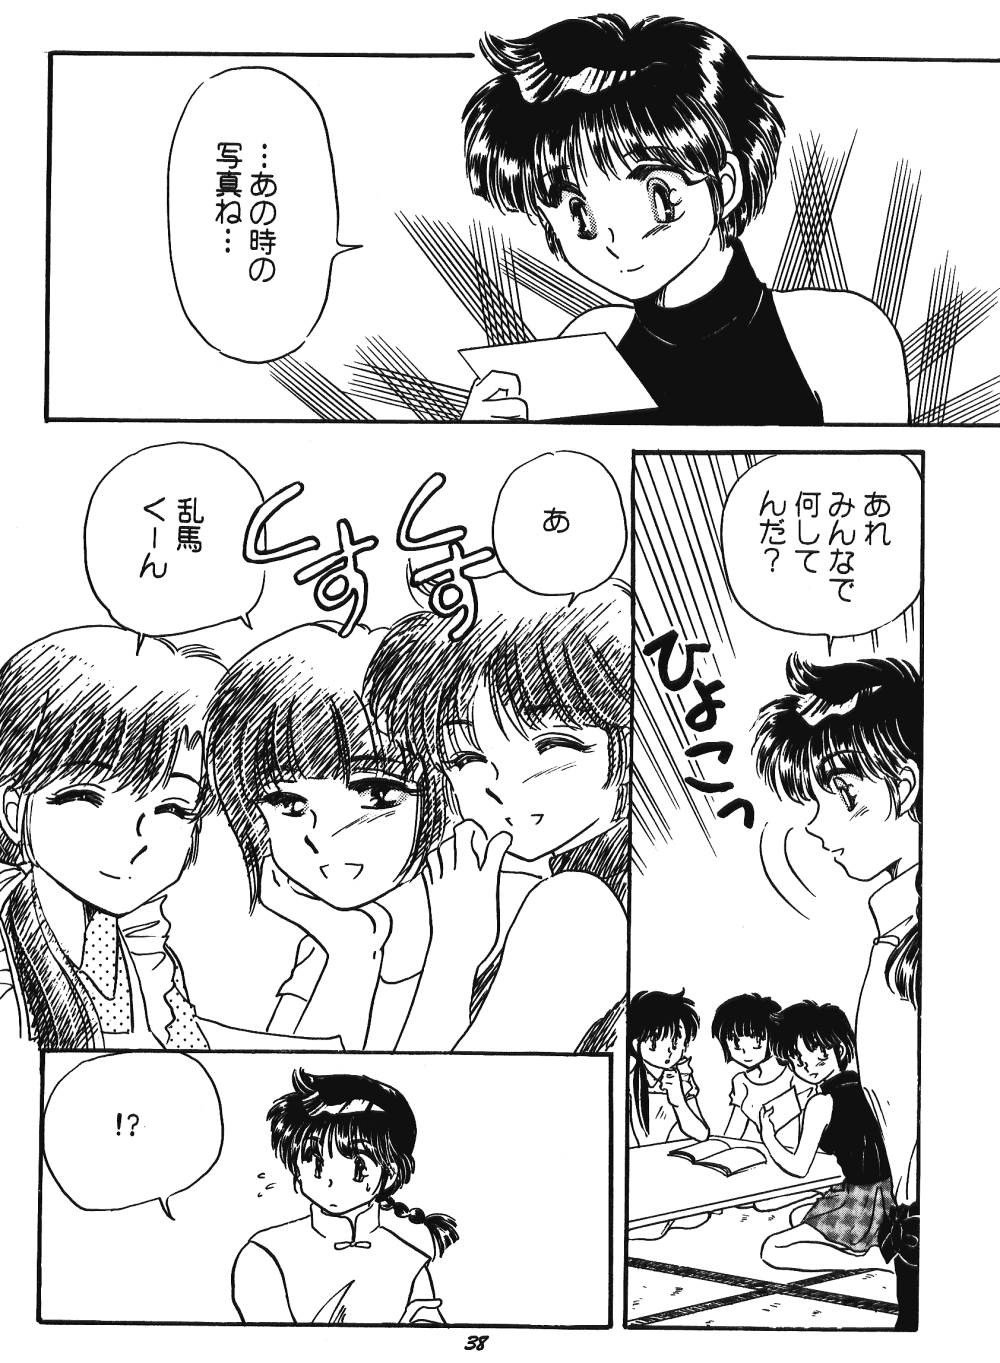 Never Forget Summer (Ranma 1/2) 35